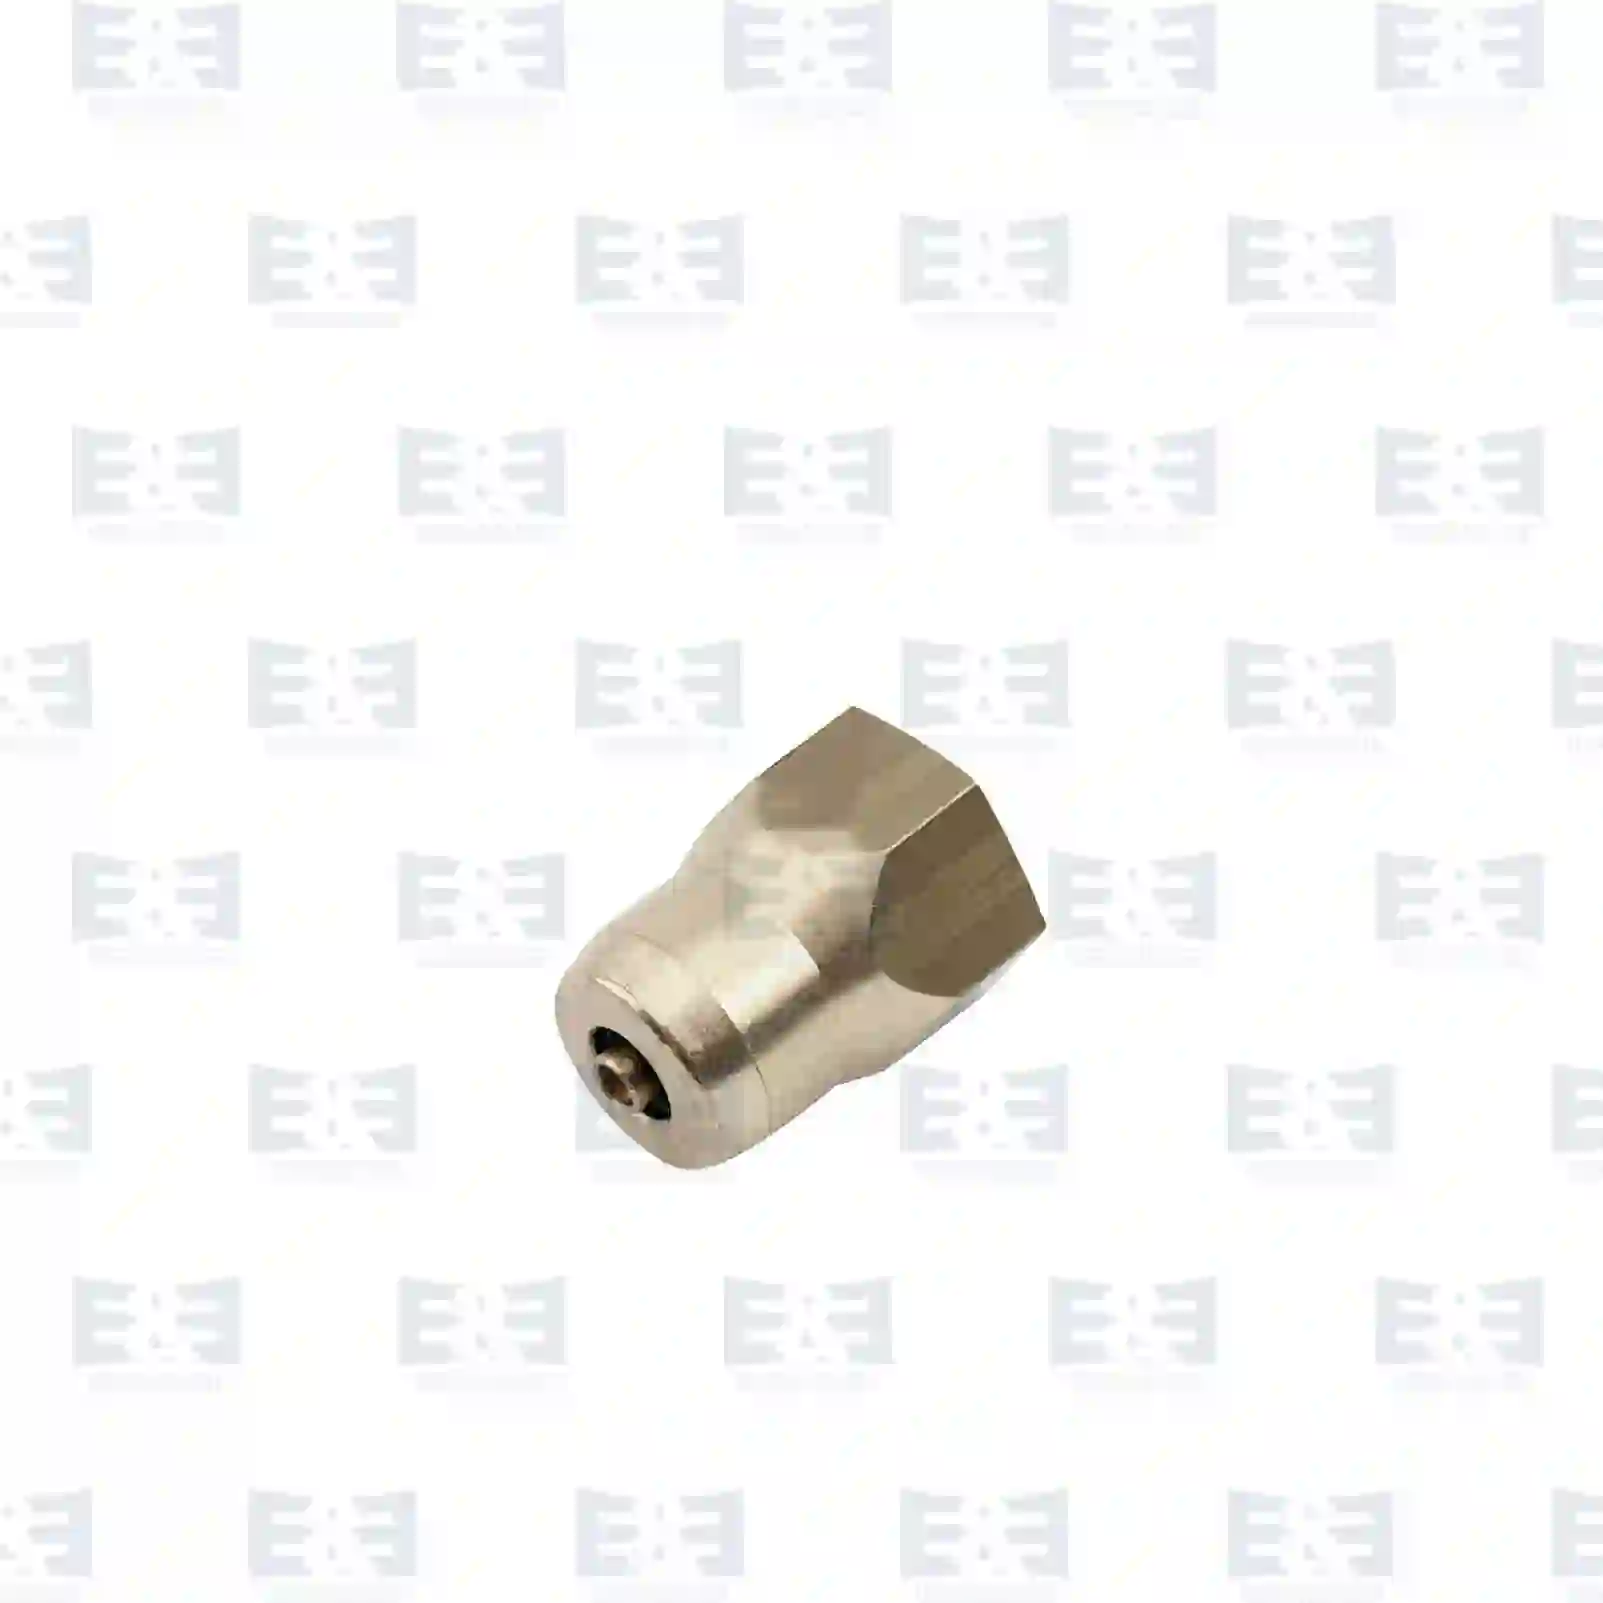  Push-in-connector || E&E Truck Spare Parts | Truck Spare Parts, Auotomotive Spare Parts